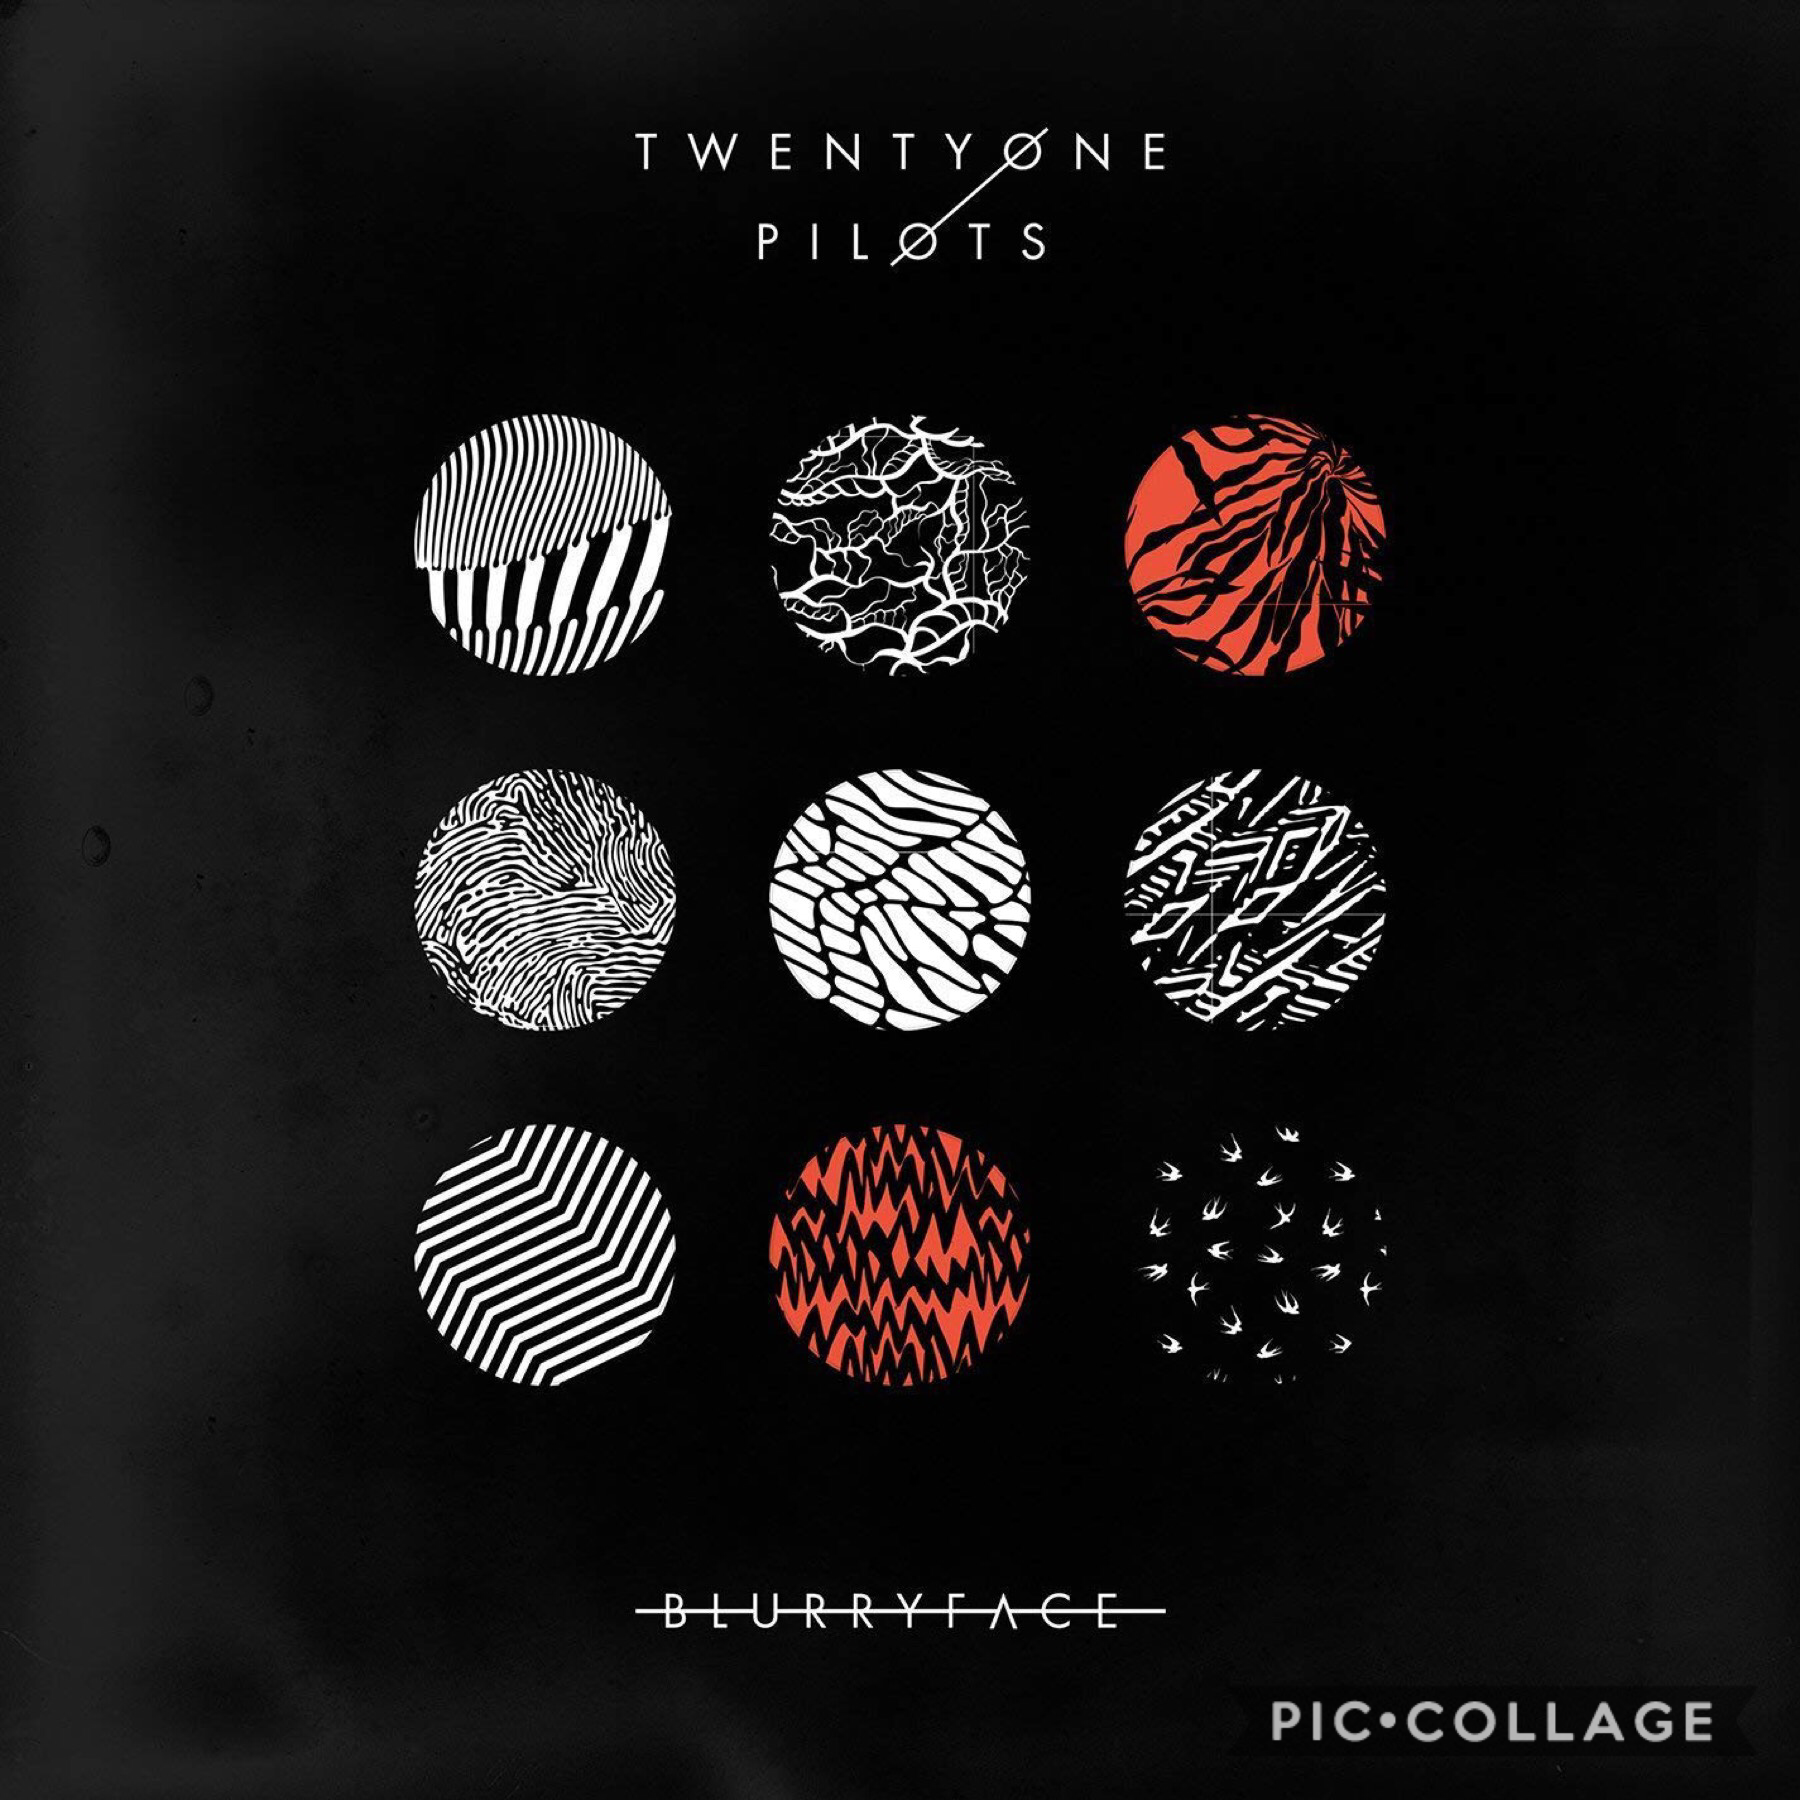 favorite song from each tøp album go:
self titled - taxi cab
regional at best - anathema
vessel - hoty/fake you out
blurryface - heavydirtysoul
trench - BANDITO